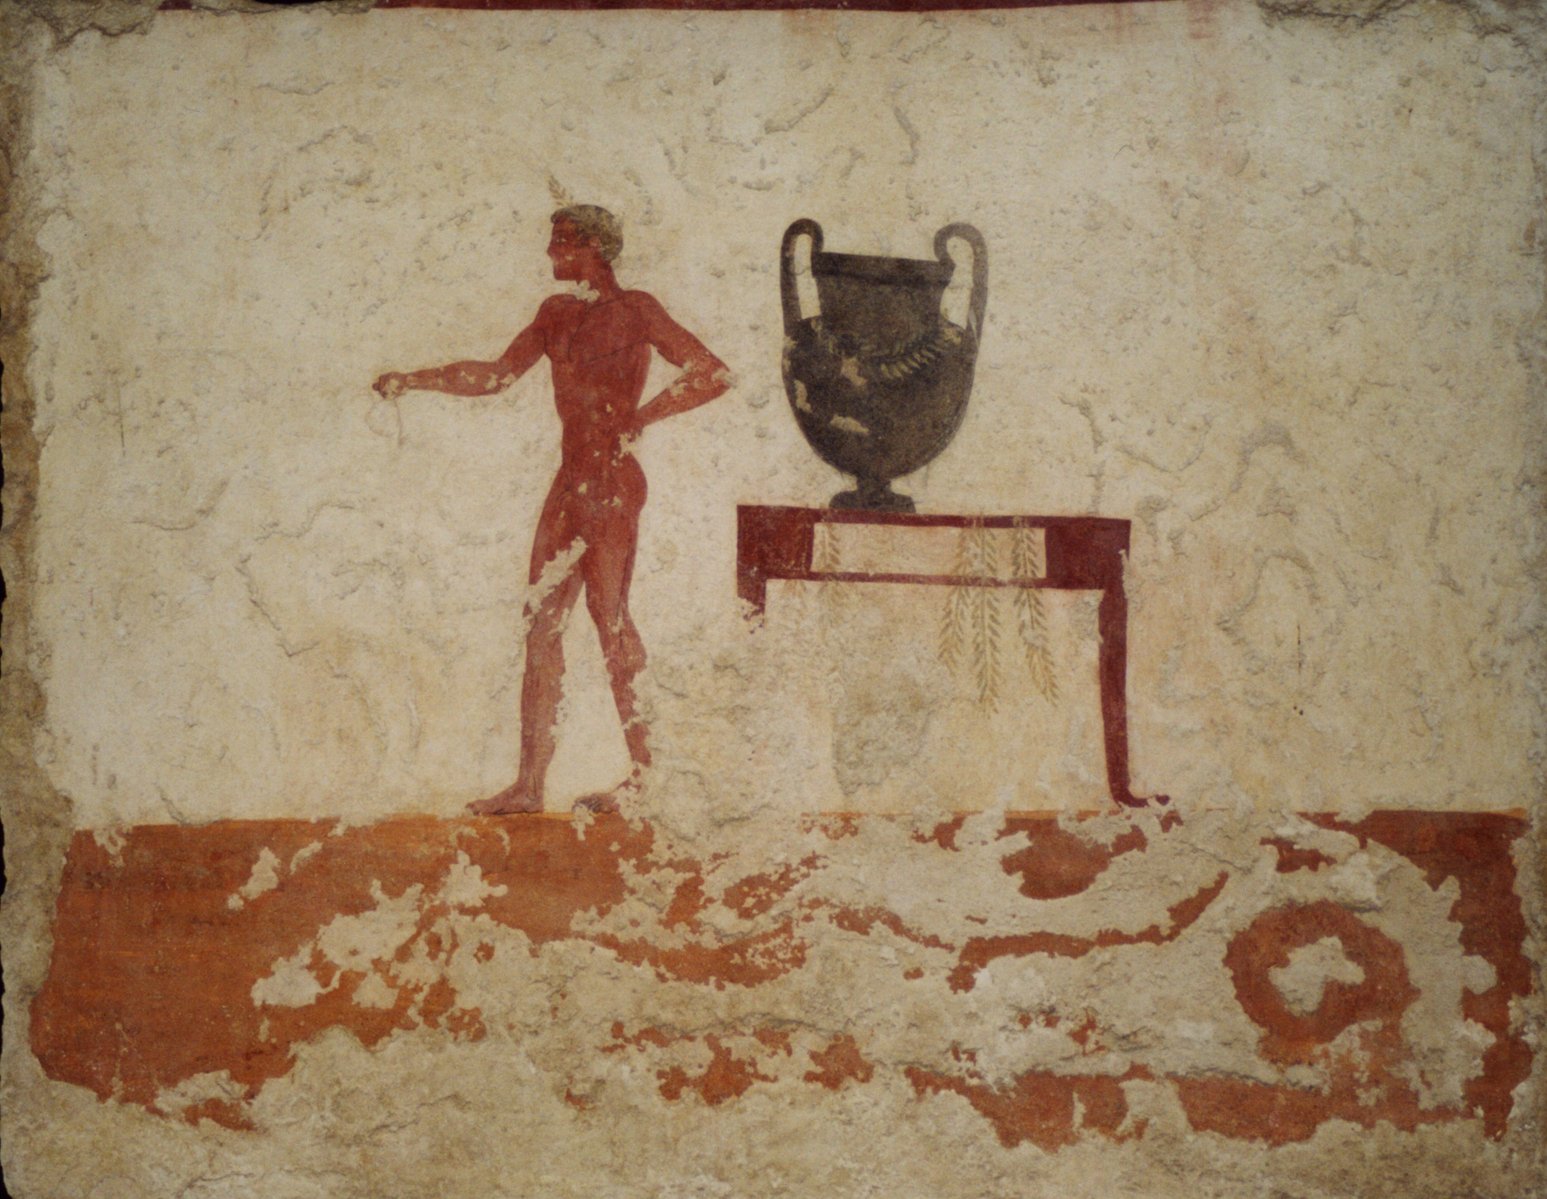 the ancient painting of a man stands at a table with an urn on it